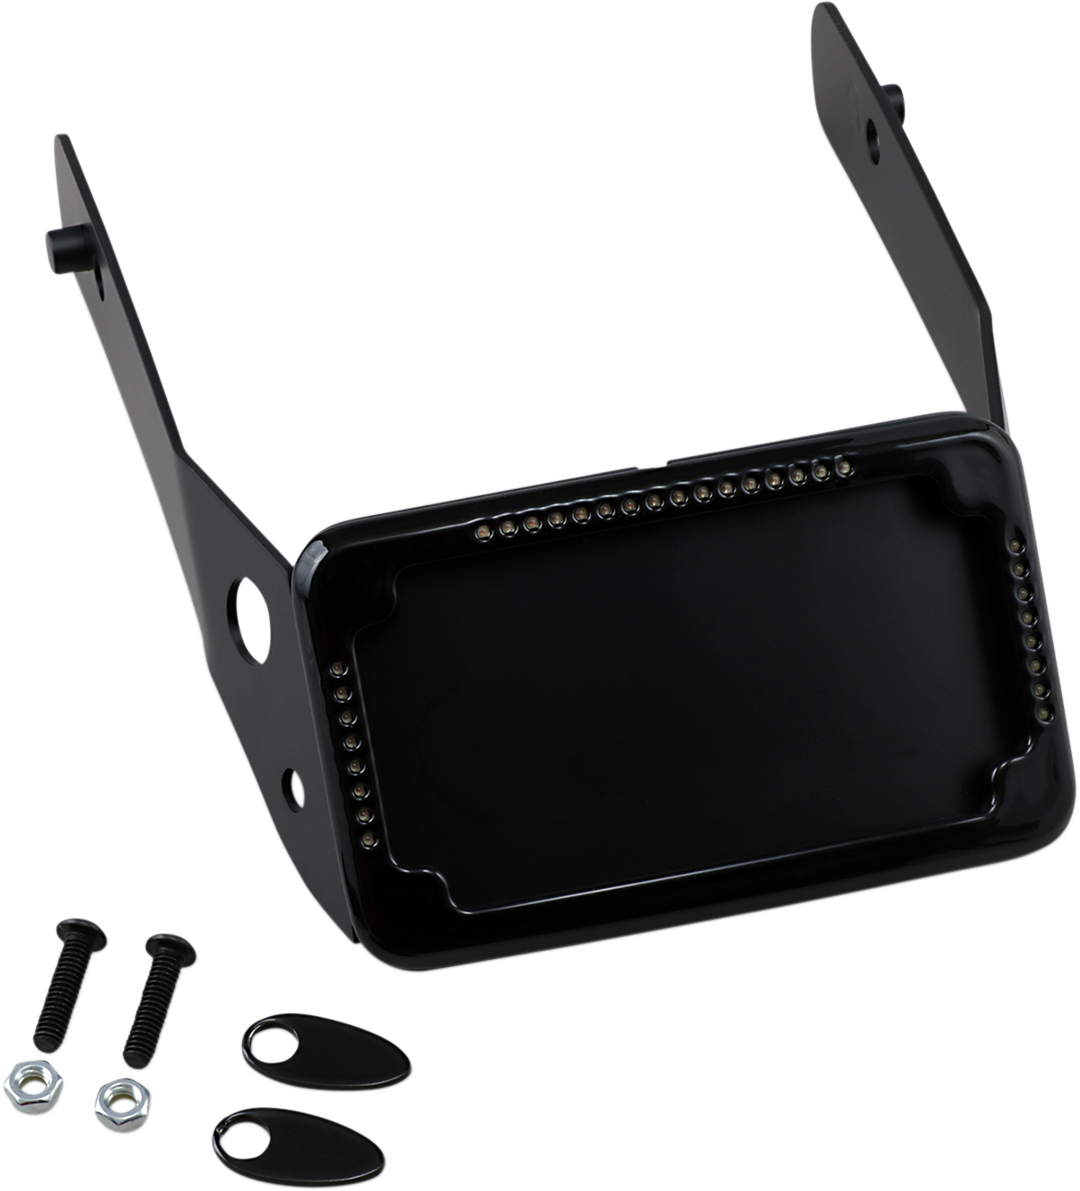 2030-0945 - CYCLE VISIONS LP Plate Frame & Mount with Signals - FXDWG - Black CV4651B